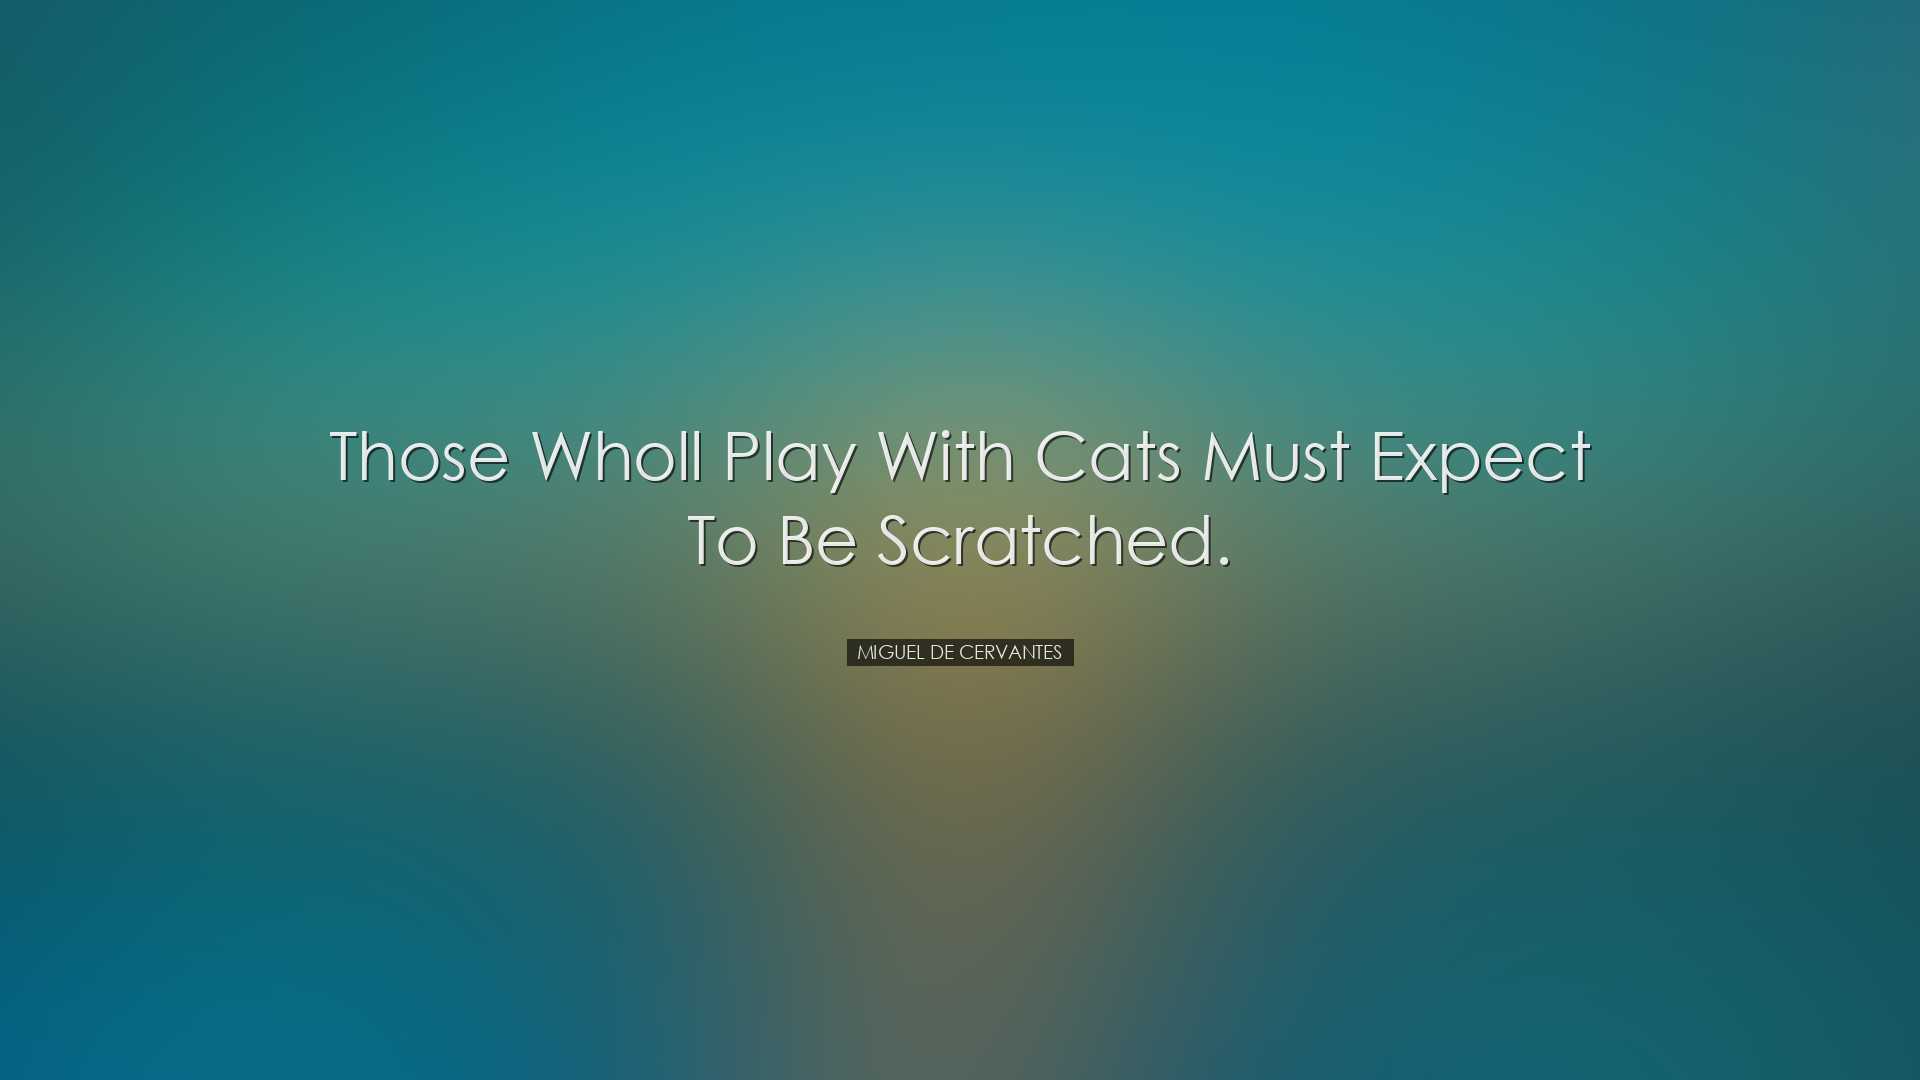 Those wholl play with cats must expect to be scratched. - Miguel d